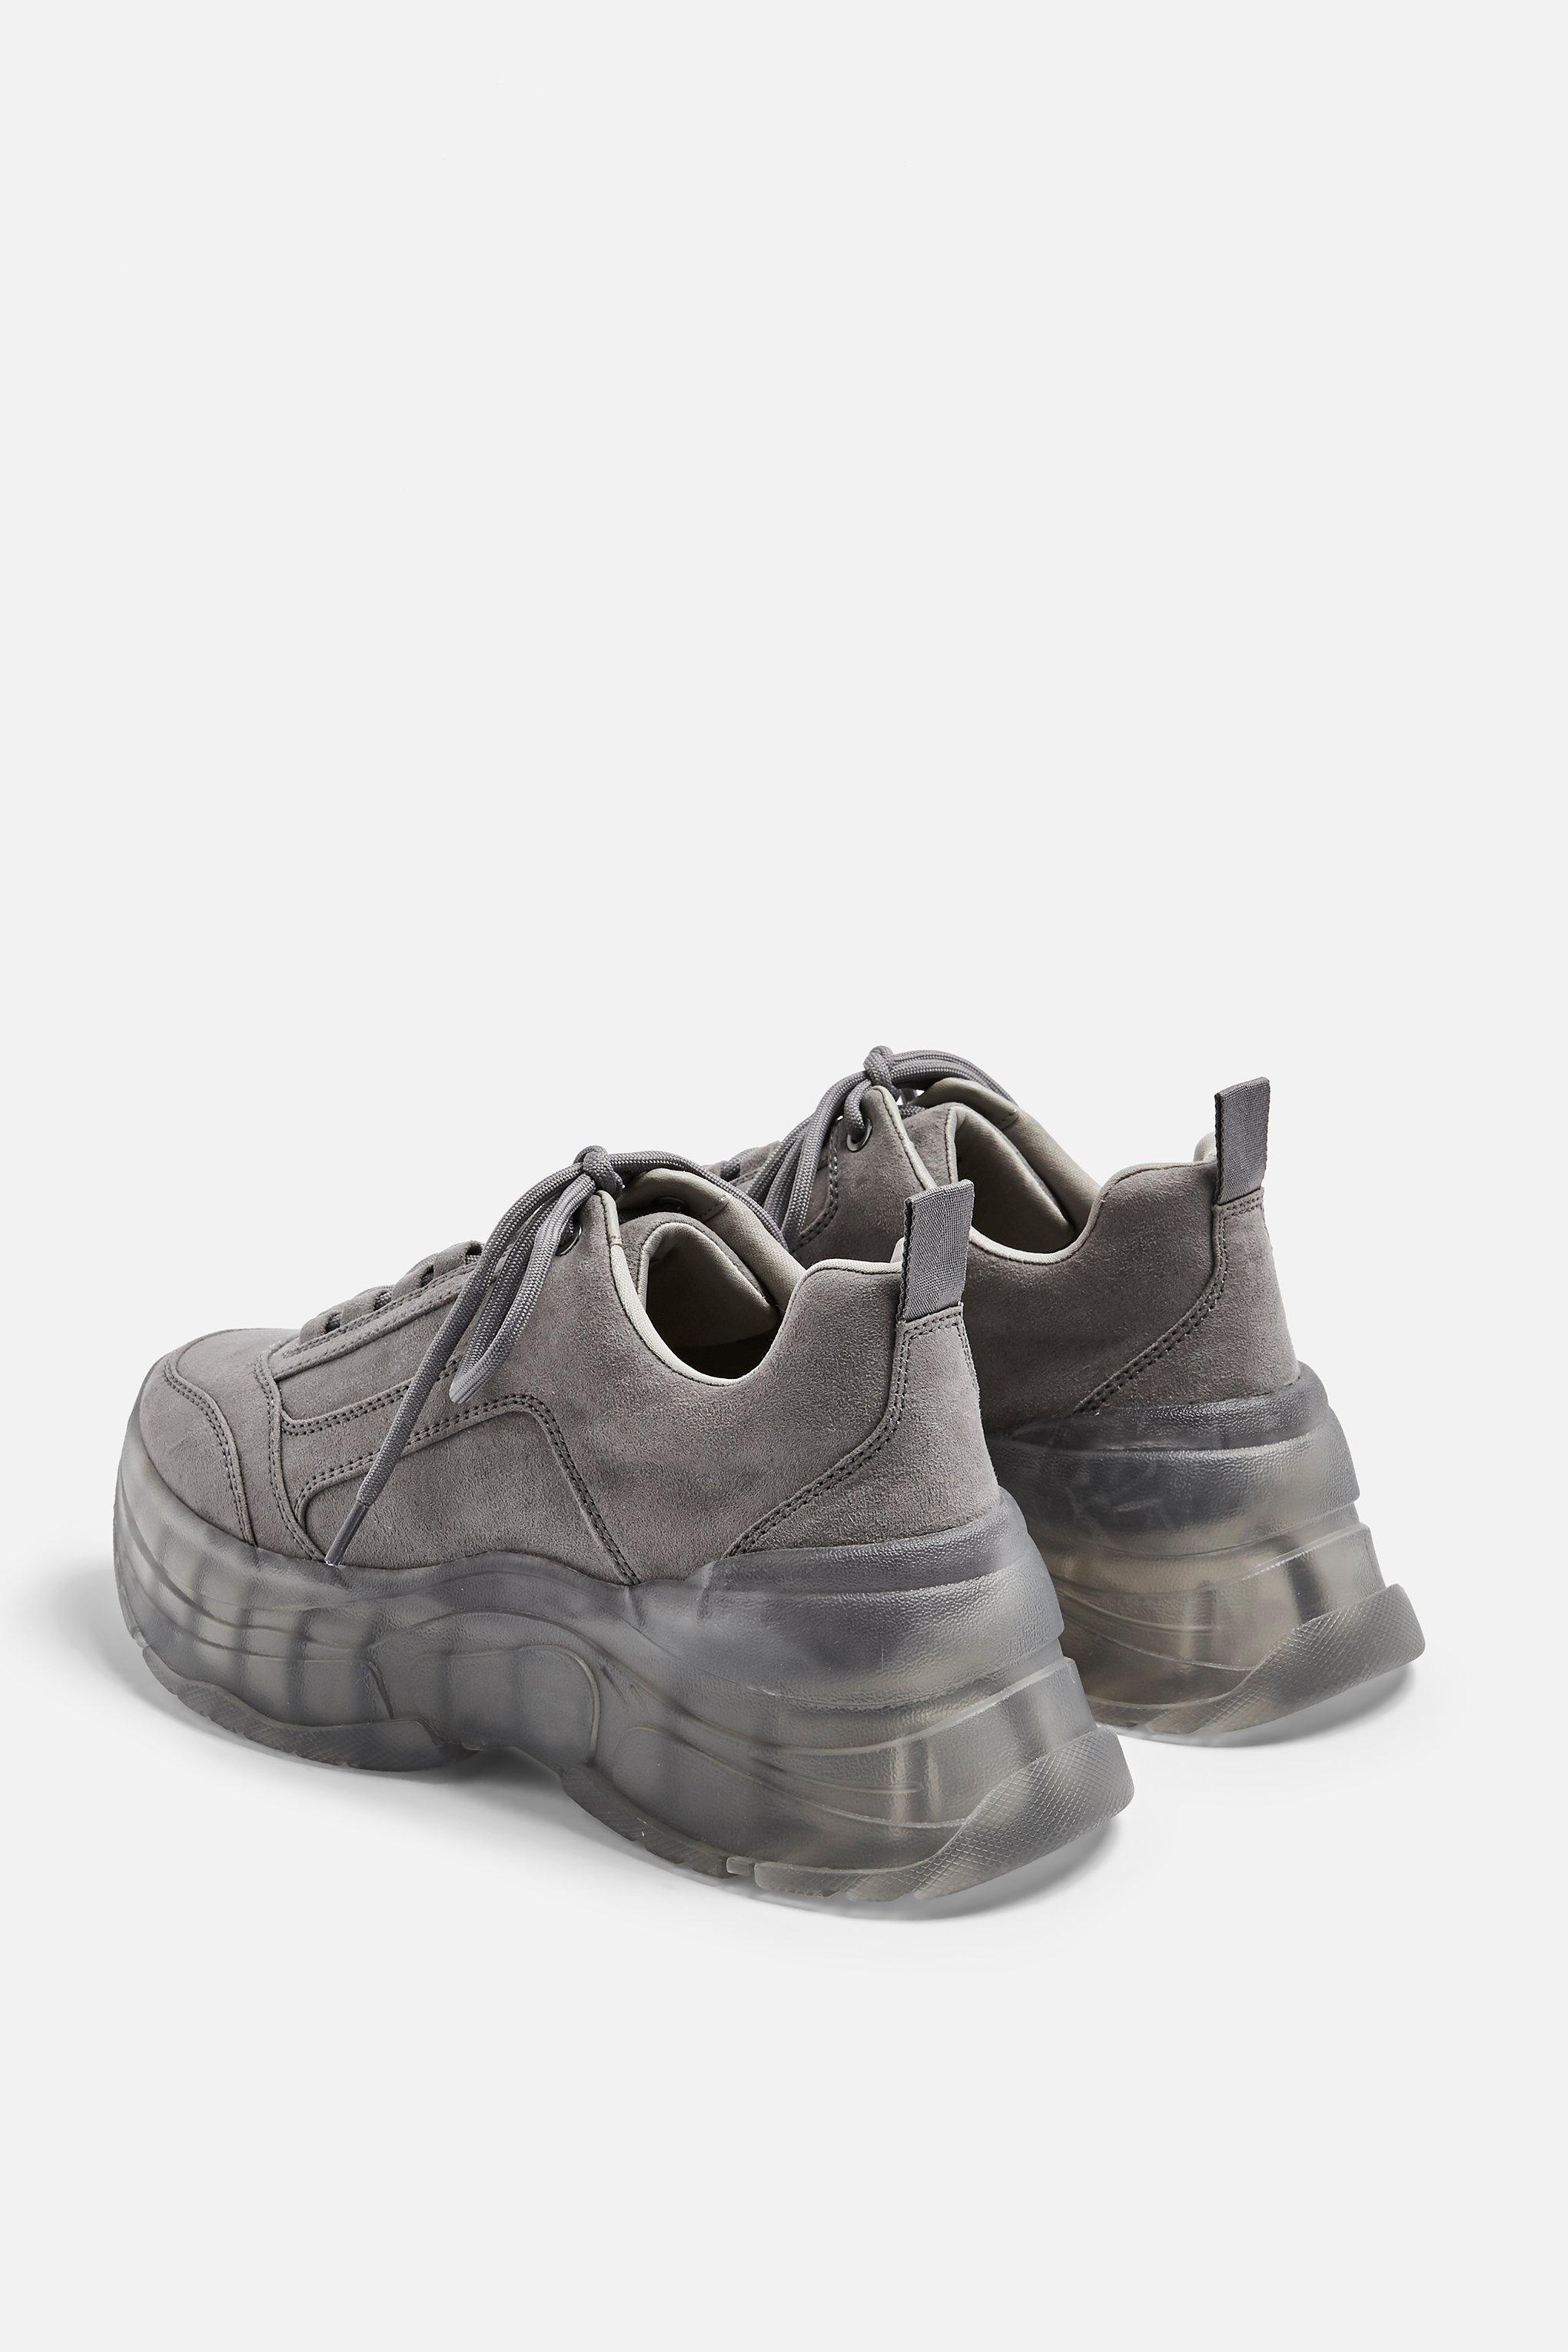 topshop grey trainers promo code for 